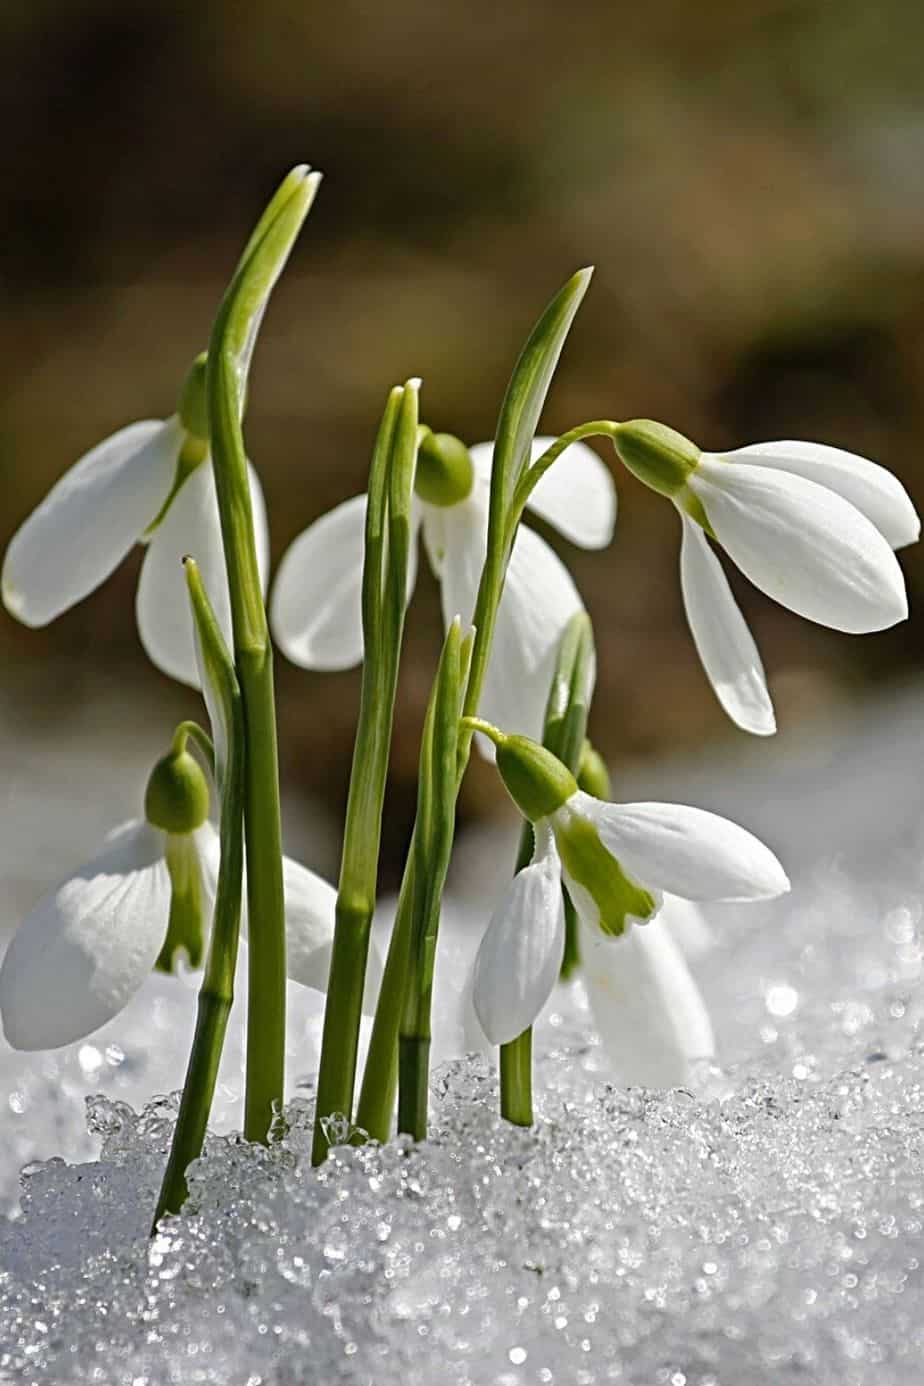 Snowdrops' blooms can first appear even if the ground in your northeast-facing garden is still covered in snow